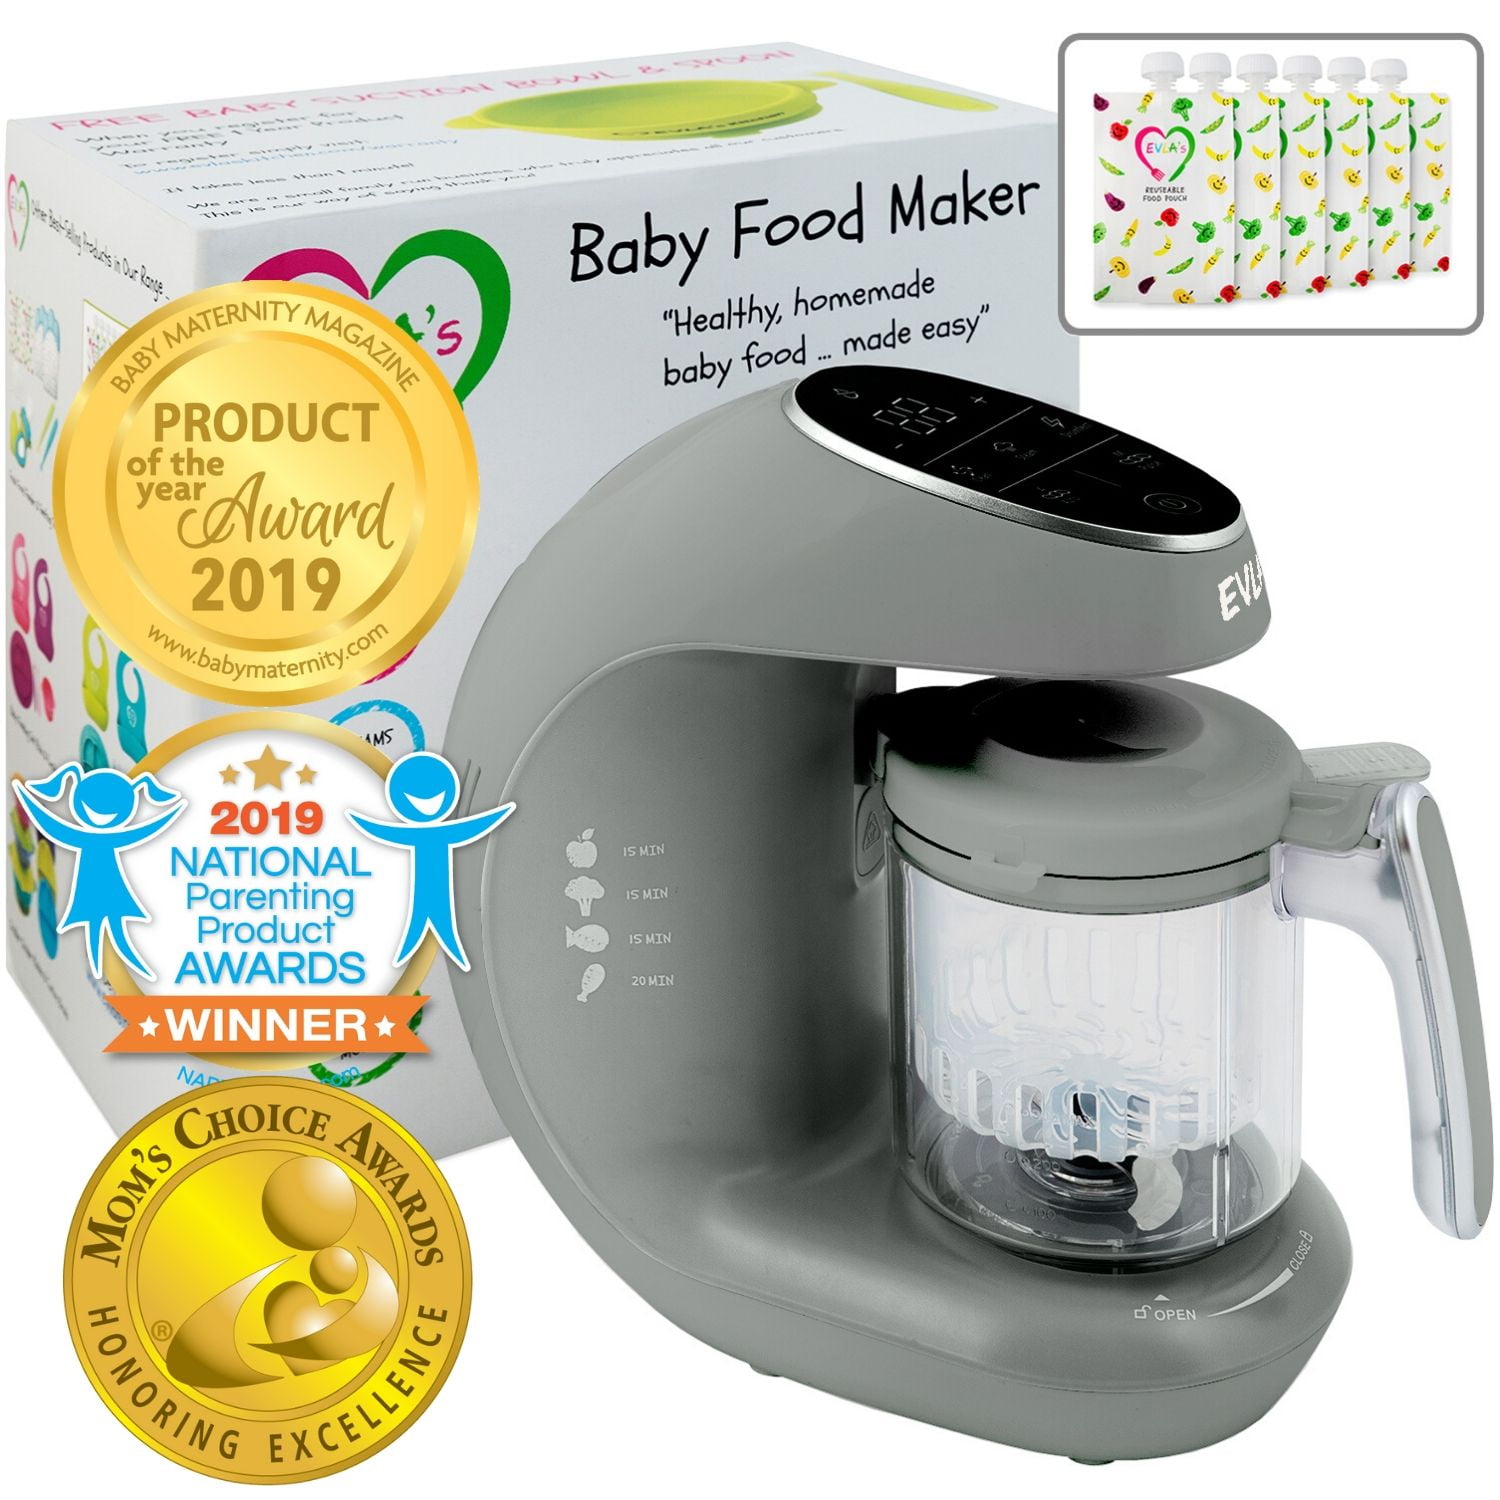 Baby Food Maker Baby Food Processor Blender Grinder Steamer Cooks & Blends  Healthy Homemade Baby Food in Minutes Self Cleans Touch Screen Con